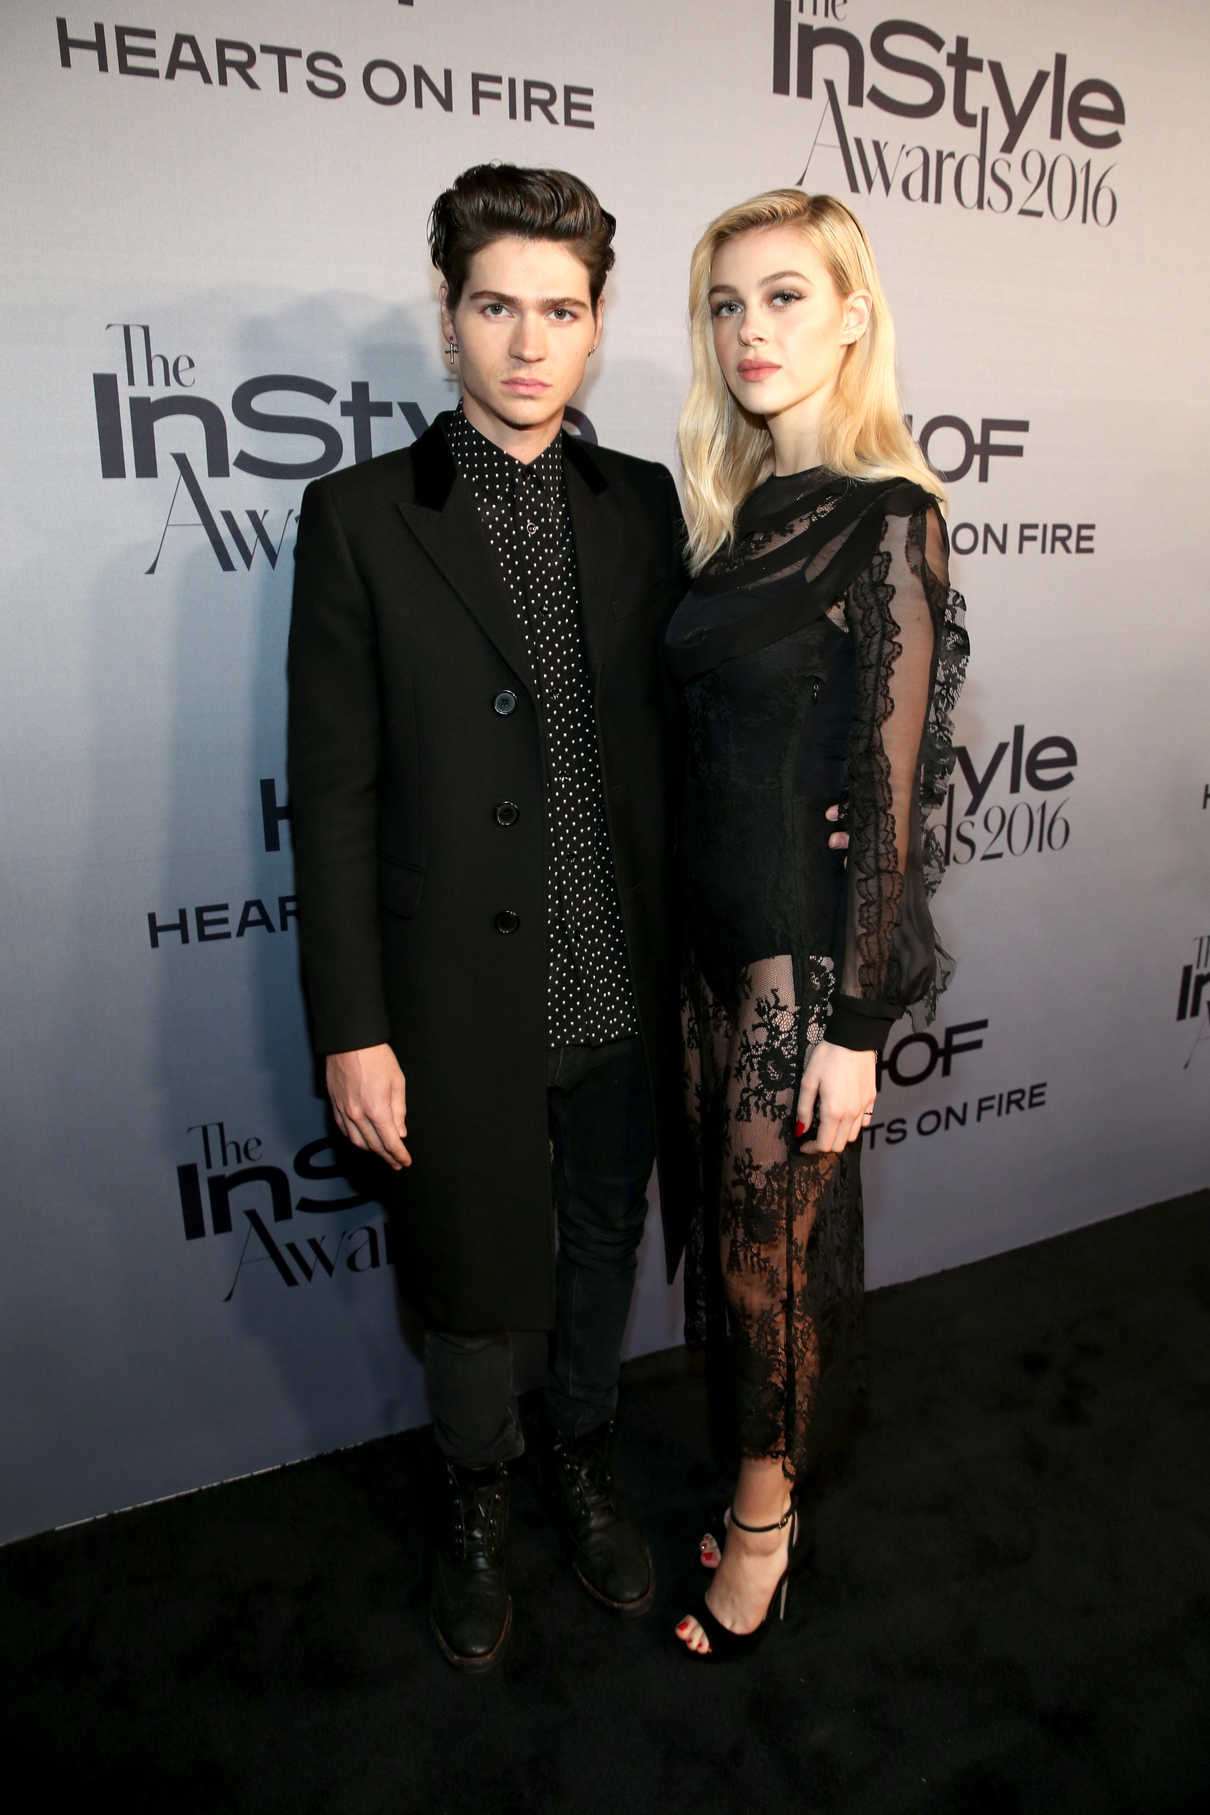 Nicola Peltz at the Instyle Awards 2016 in Los Angeles 10/24/2016-3